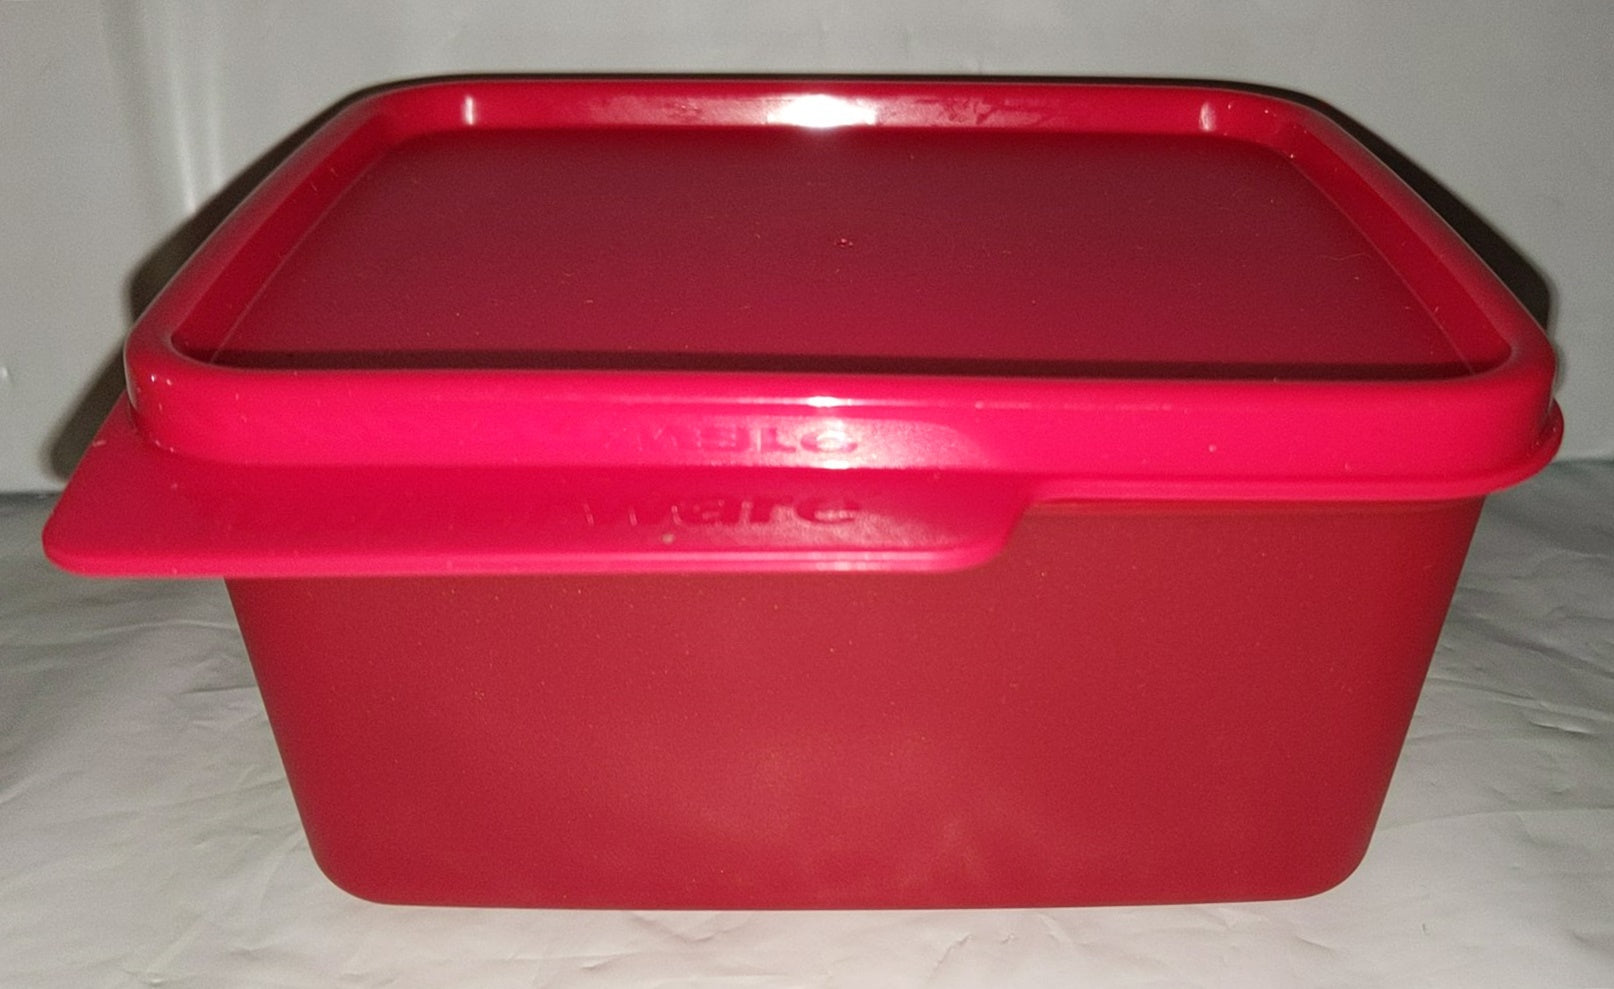 Tupperware Basic Bright Mini Rectangular 1 cup Snack Container Set of 2 Pink.!